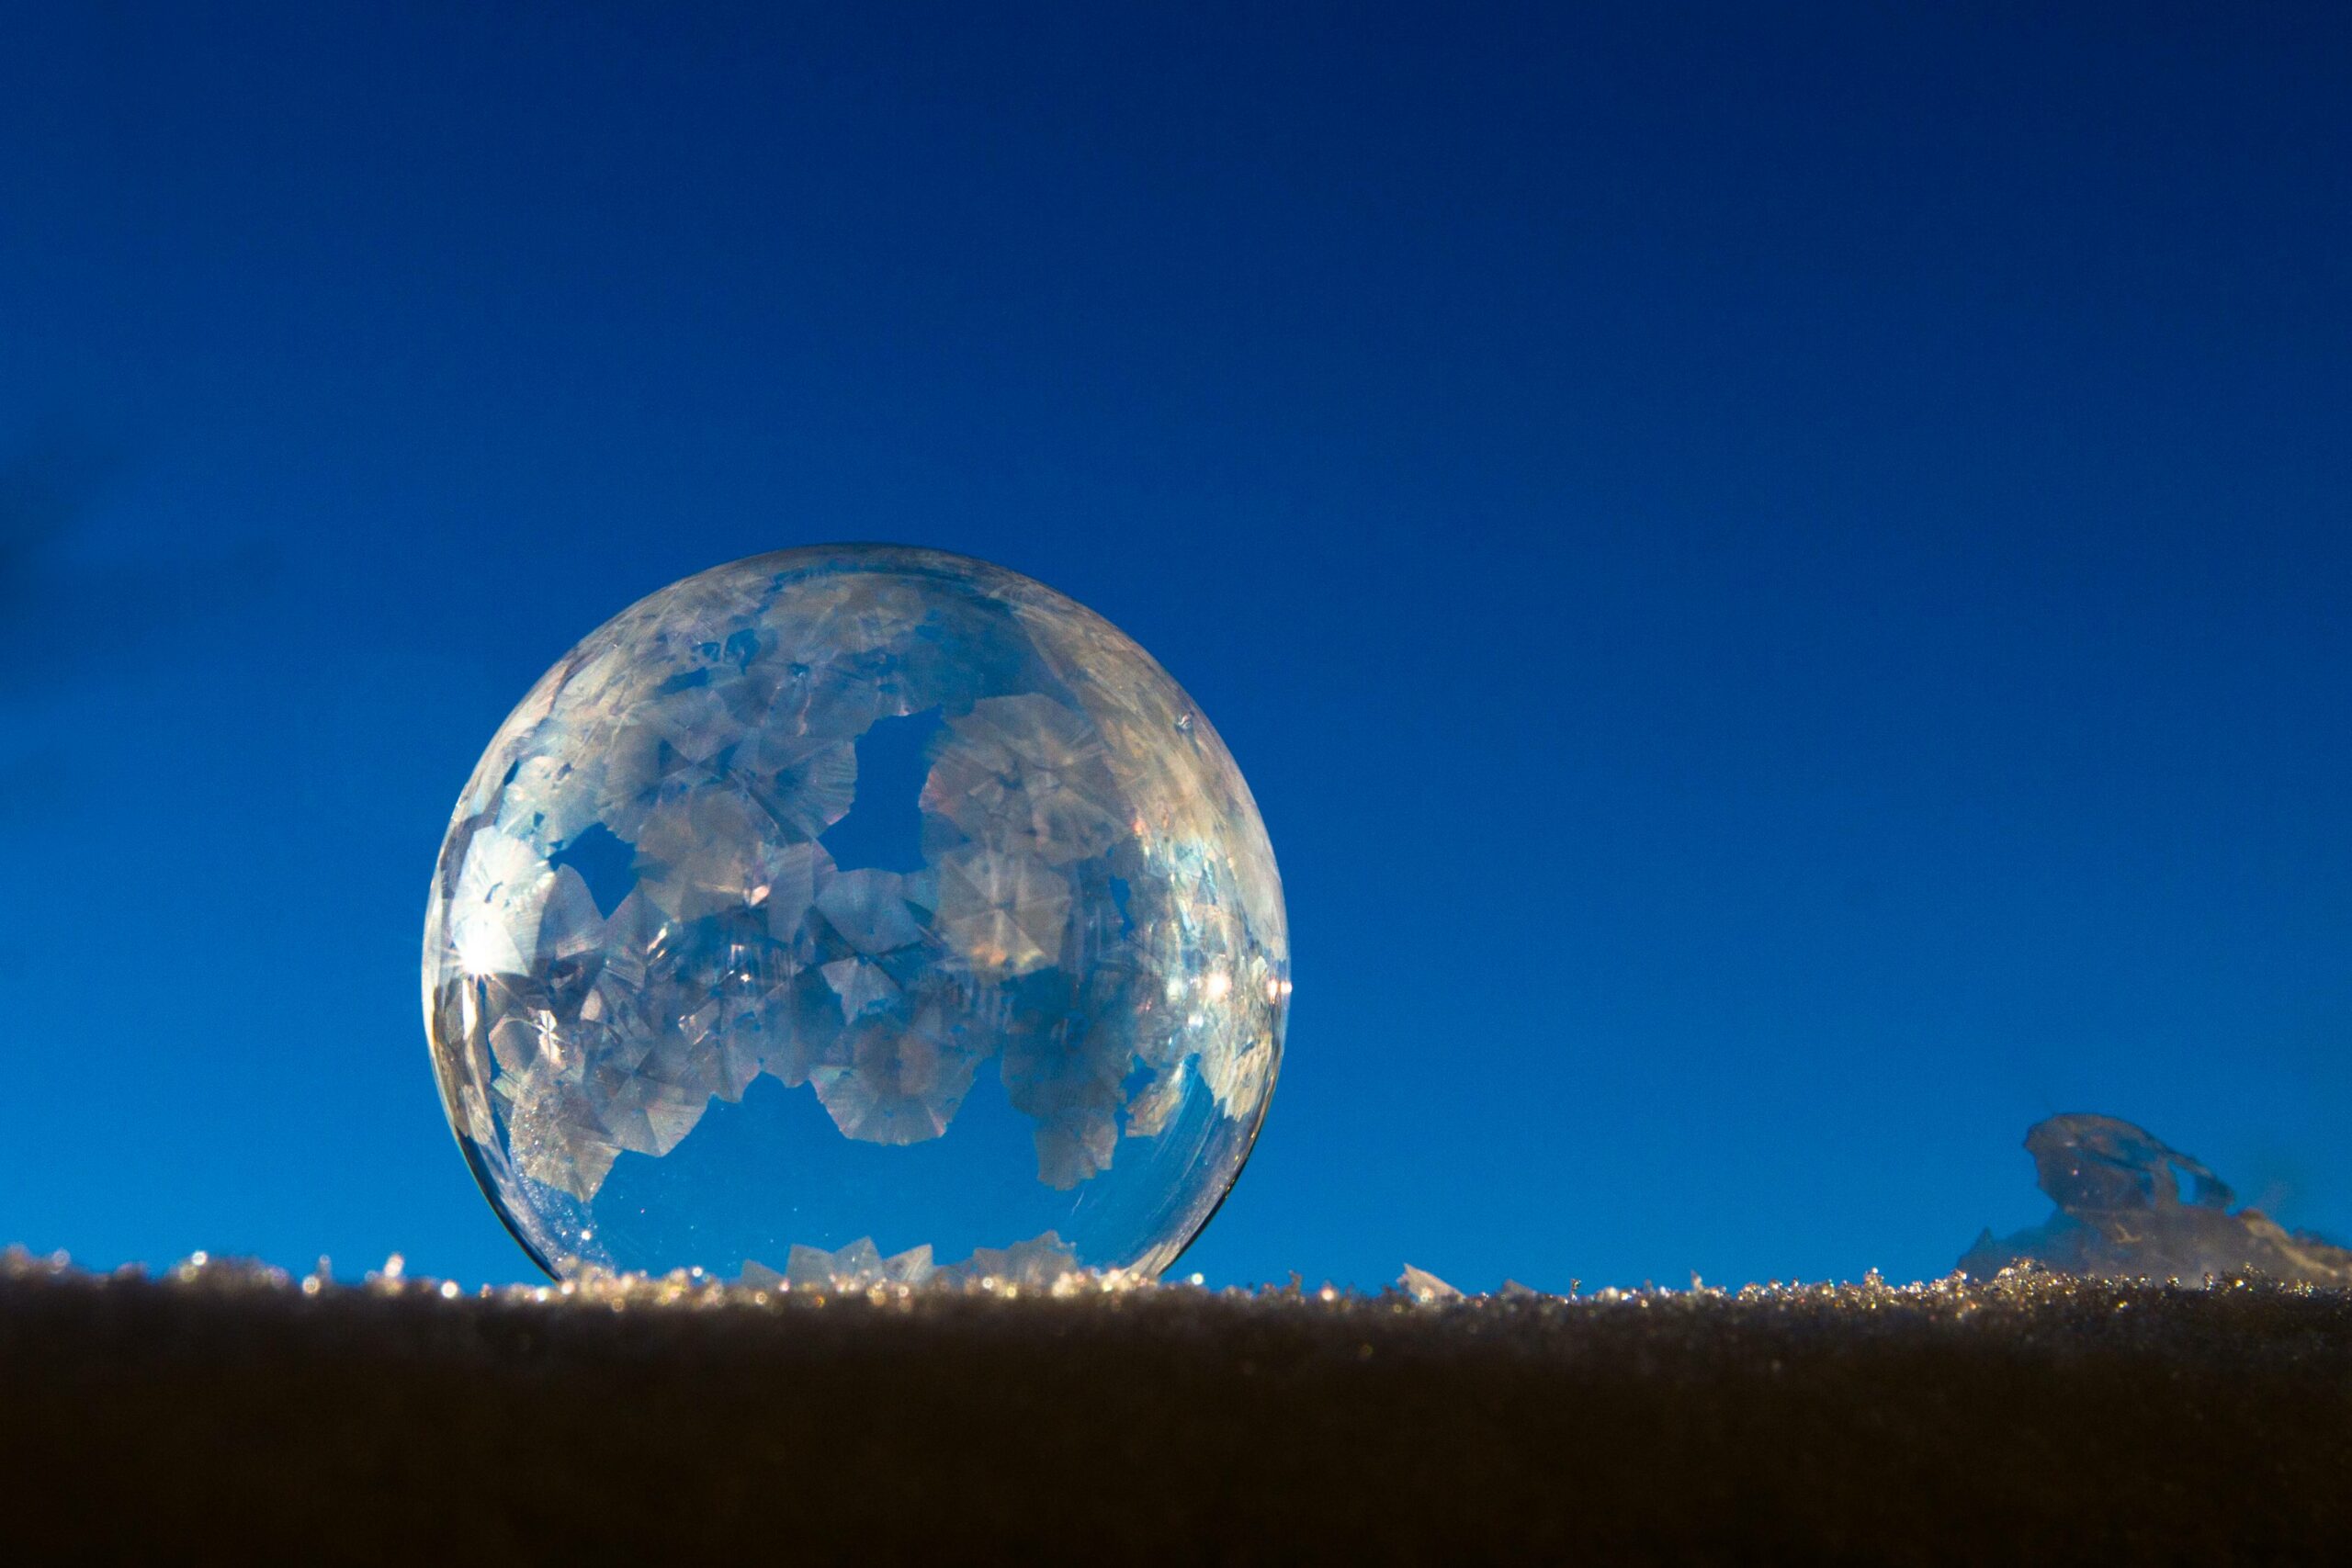 How to create remarkable frozen bubbles in winter